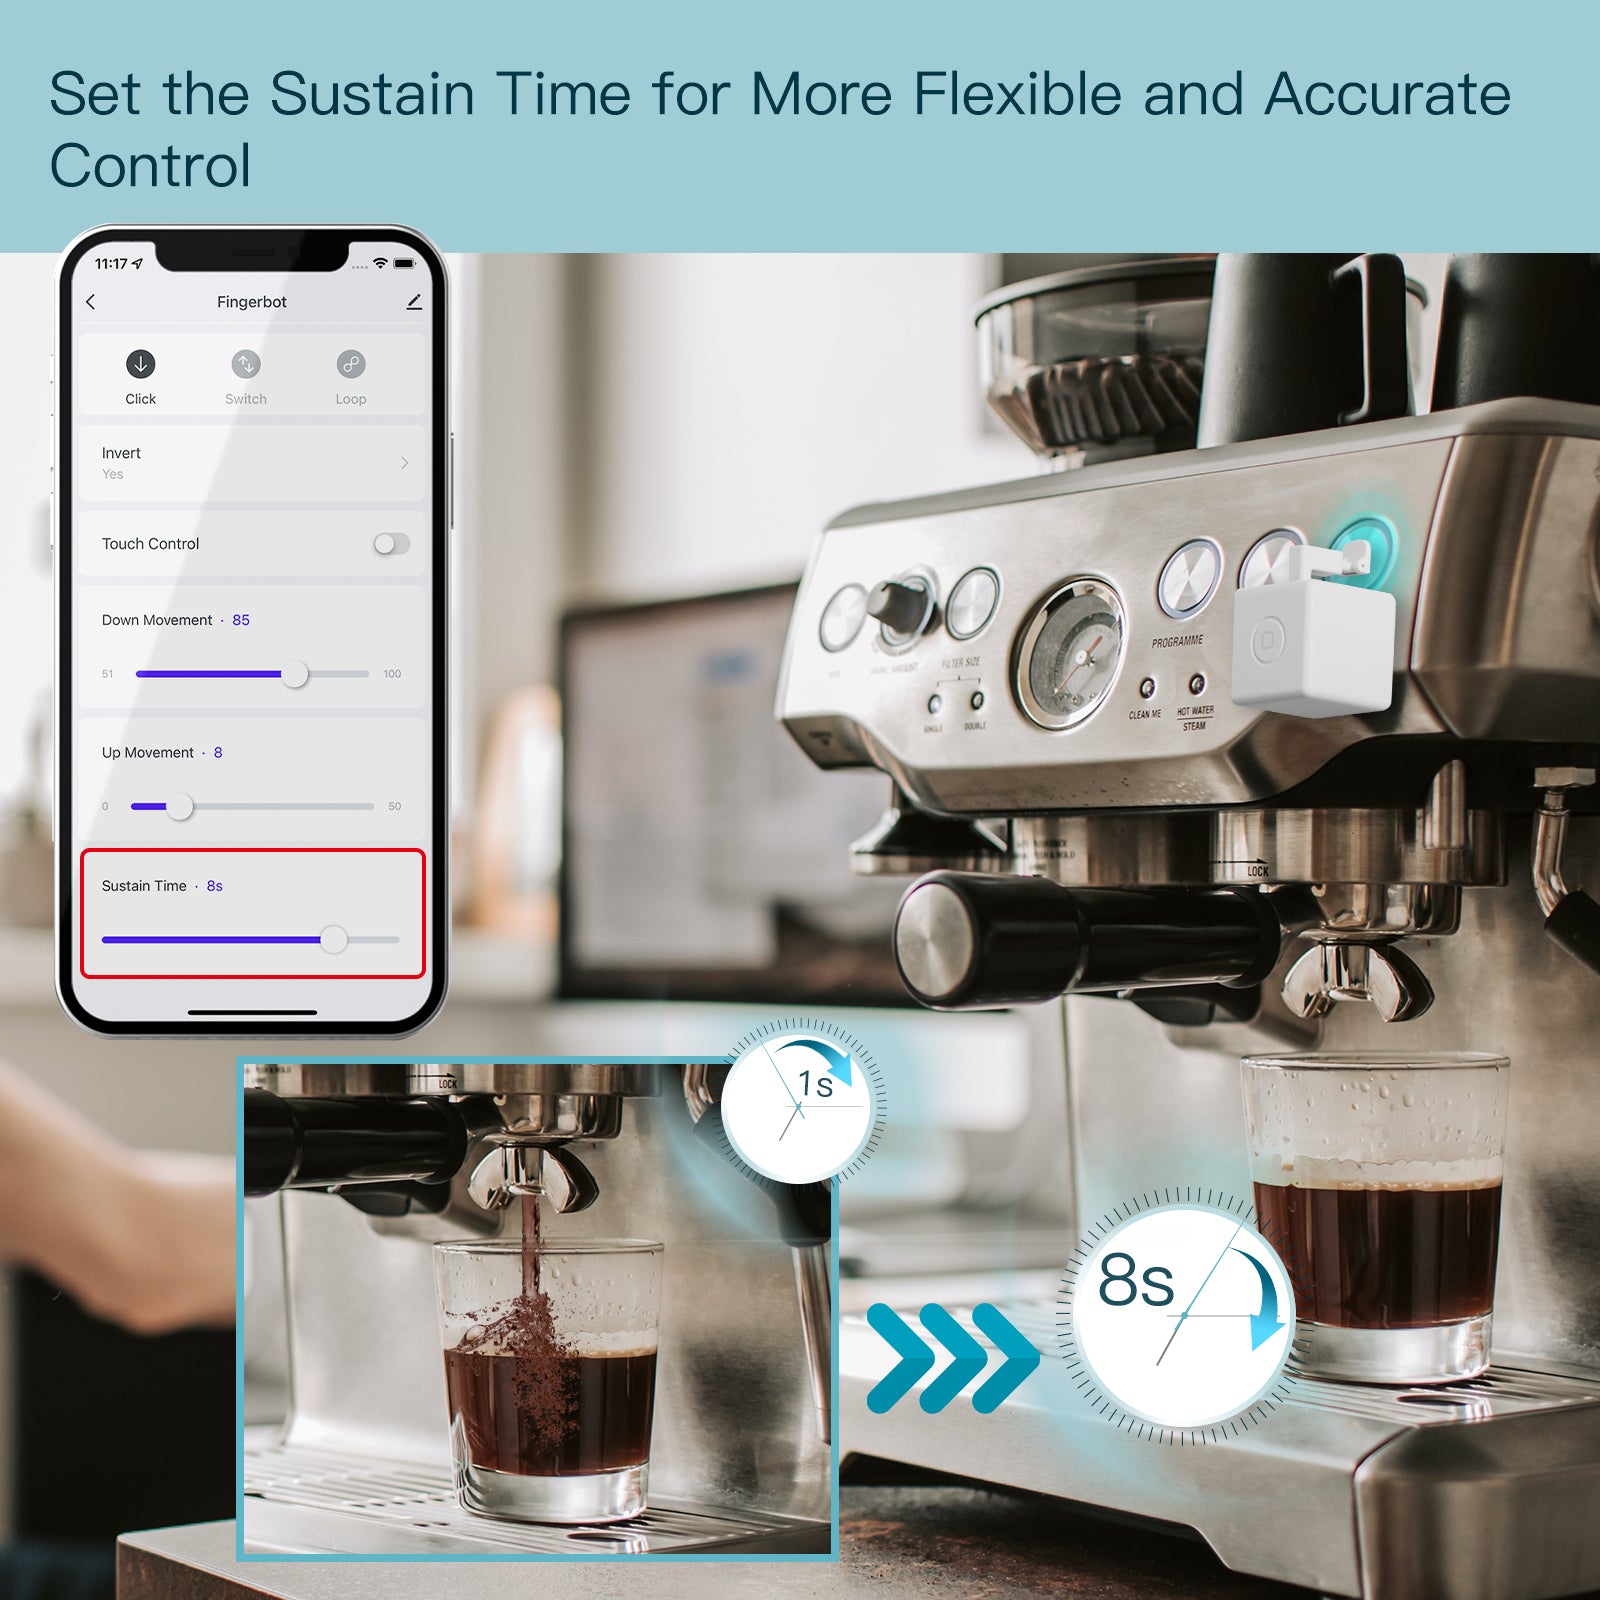 Set the Sustain Time for More Flexible and Accurate Control